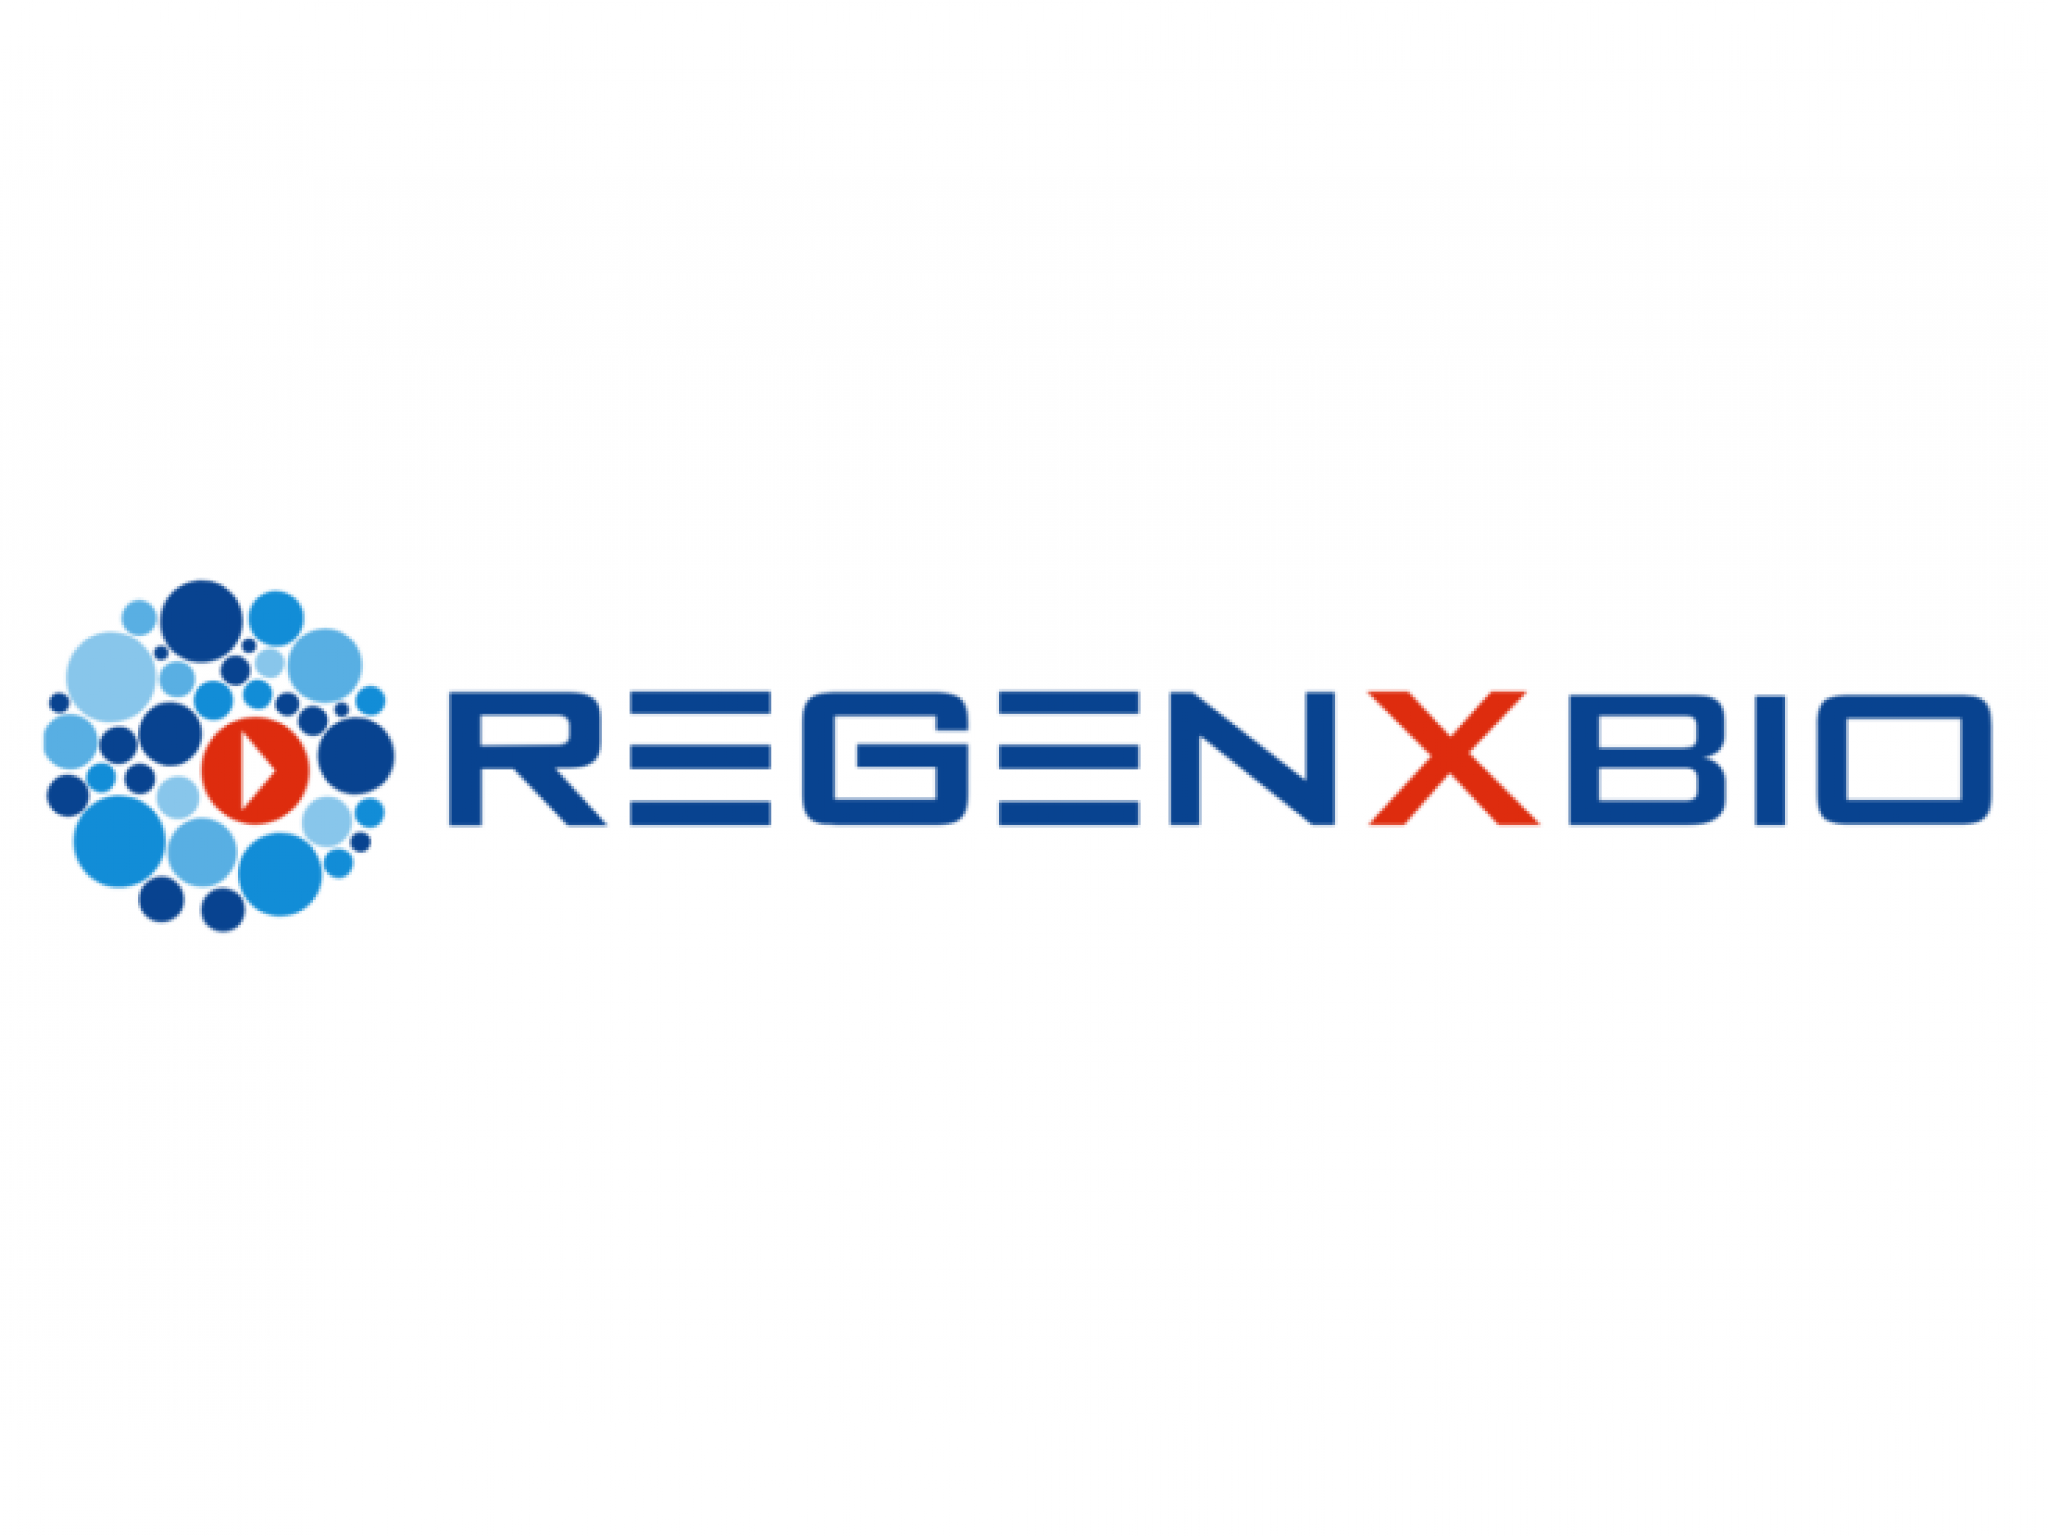  regenxbios-muscle-wasting-disorder-drug-shows-strength-improved-motor-function-stock-soars 